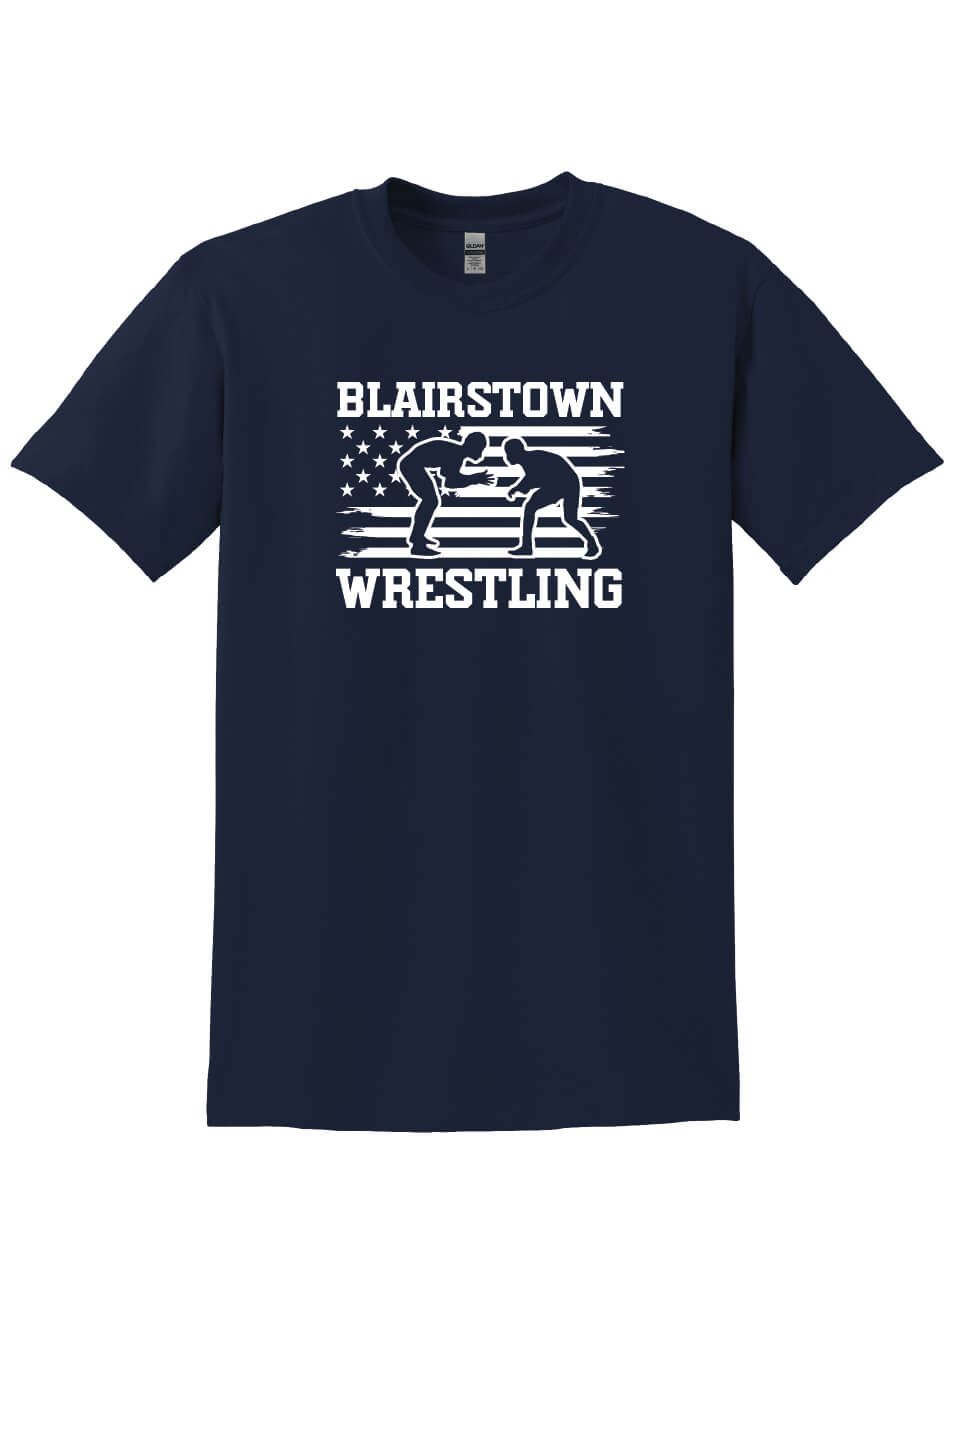 Blairstown Wrestling Flag Short Sleeve T-Shirt (Youth) navy